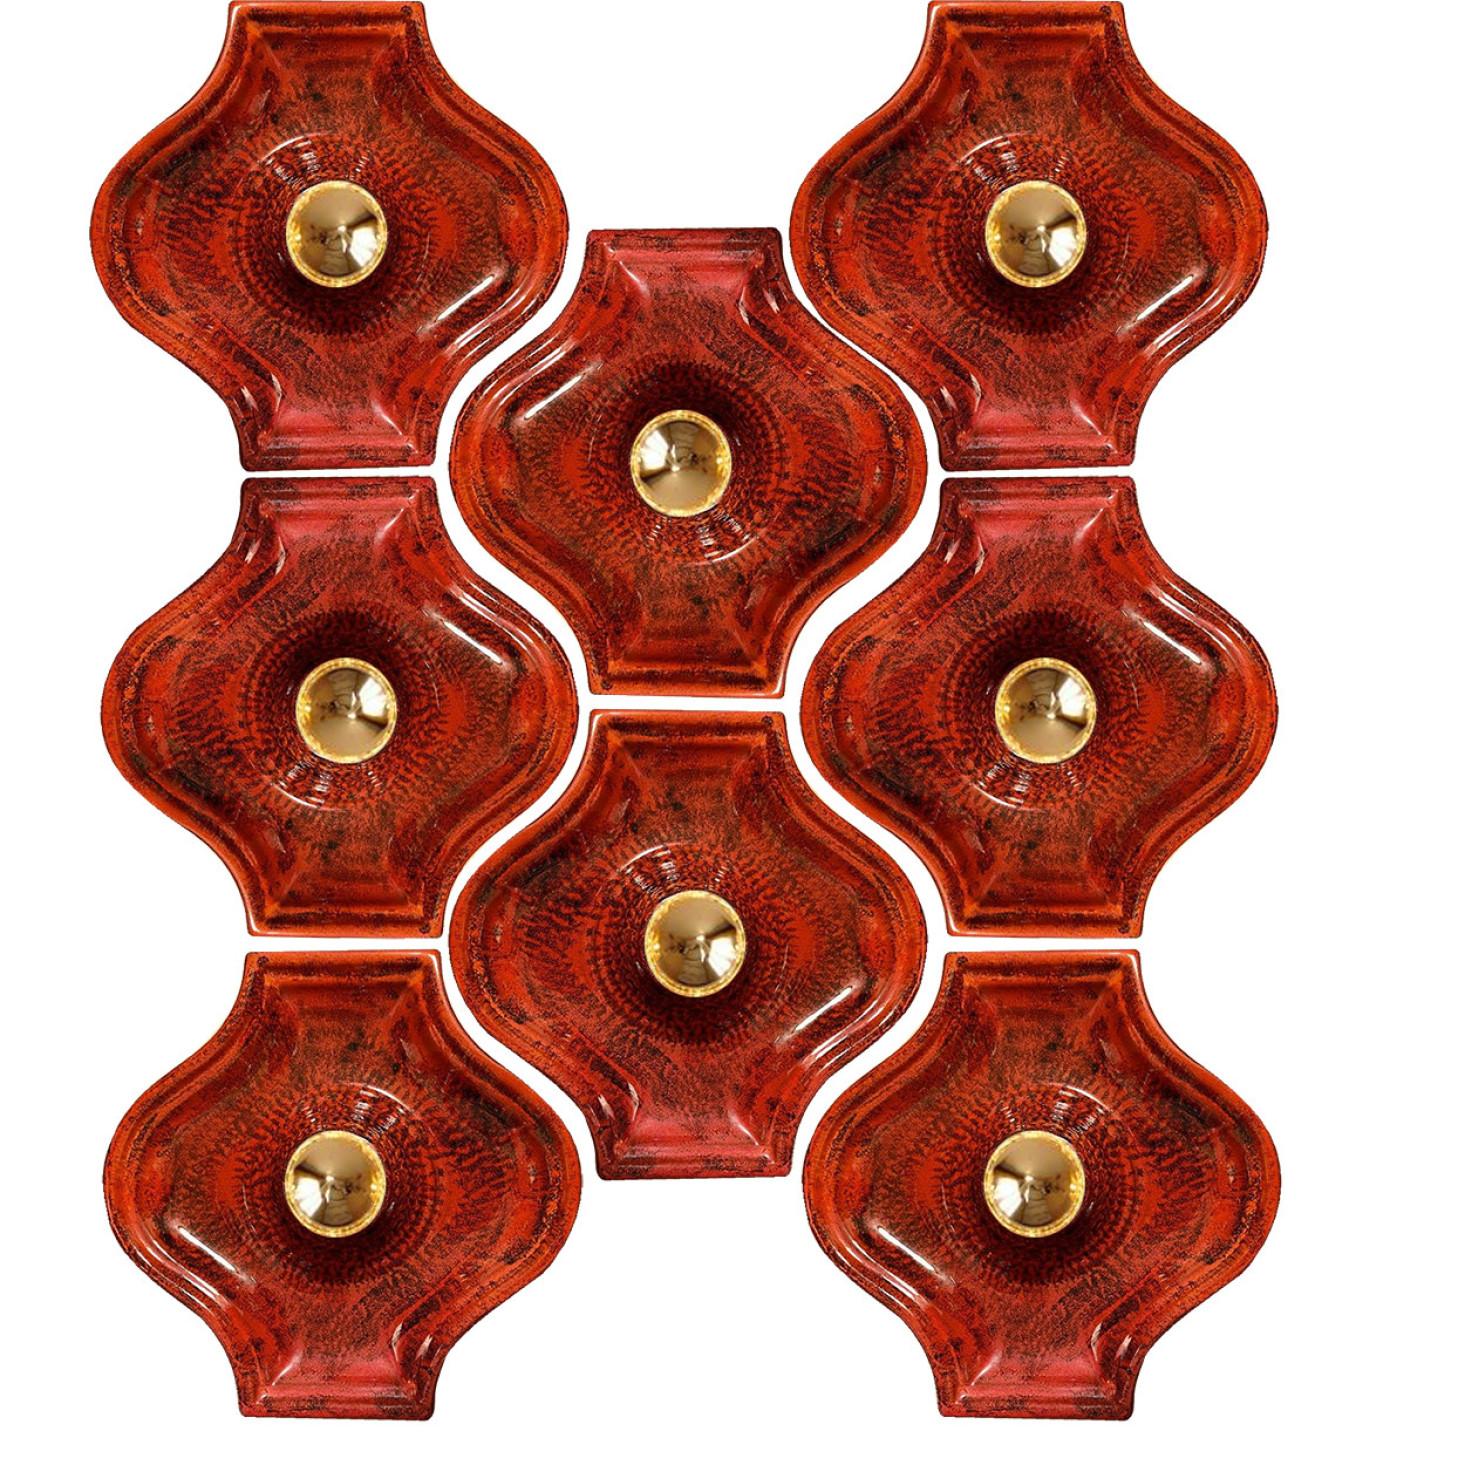 Red ceramic wall lights in Fat Lava style. Manufactured by Hustadt Leuchten Keramik, Germany in the 1970s.

The style of the glaze is called 'Fat Lava'. Which means the glaze is thick on some parts, like lava.
A typical way to finish ceramic in